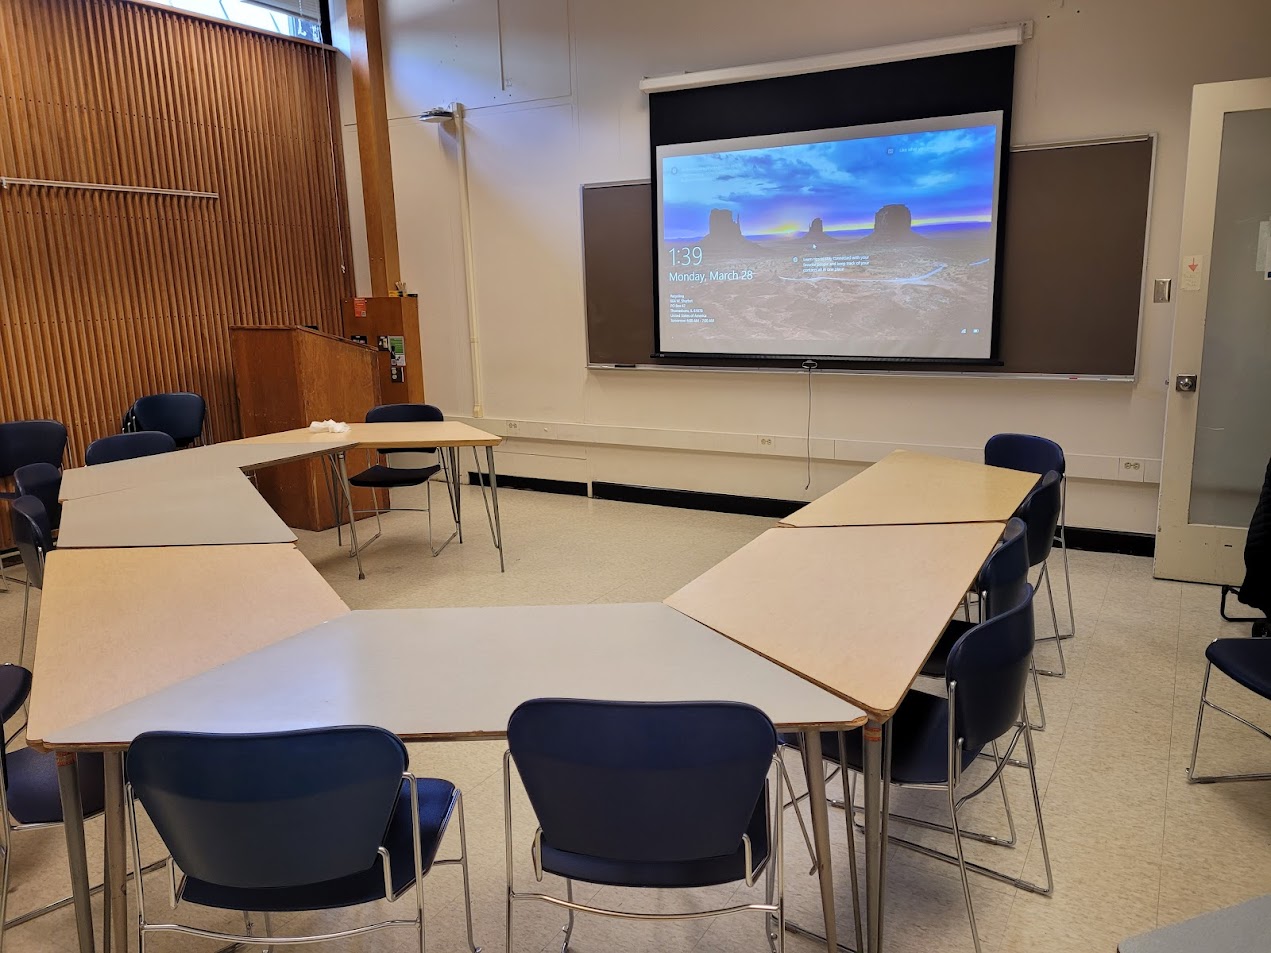 A view of the moveable tables and chairs, chalkboard, and instructor table in front.